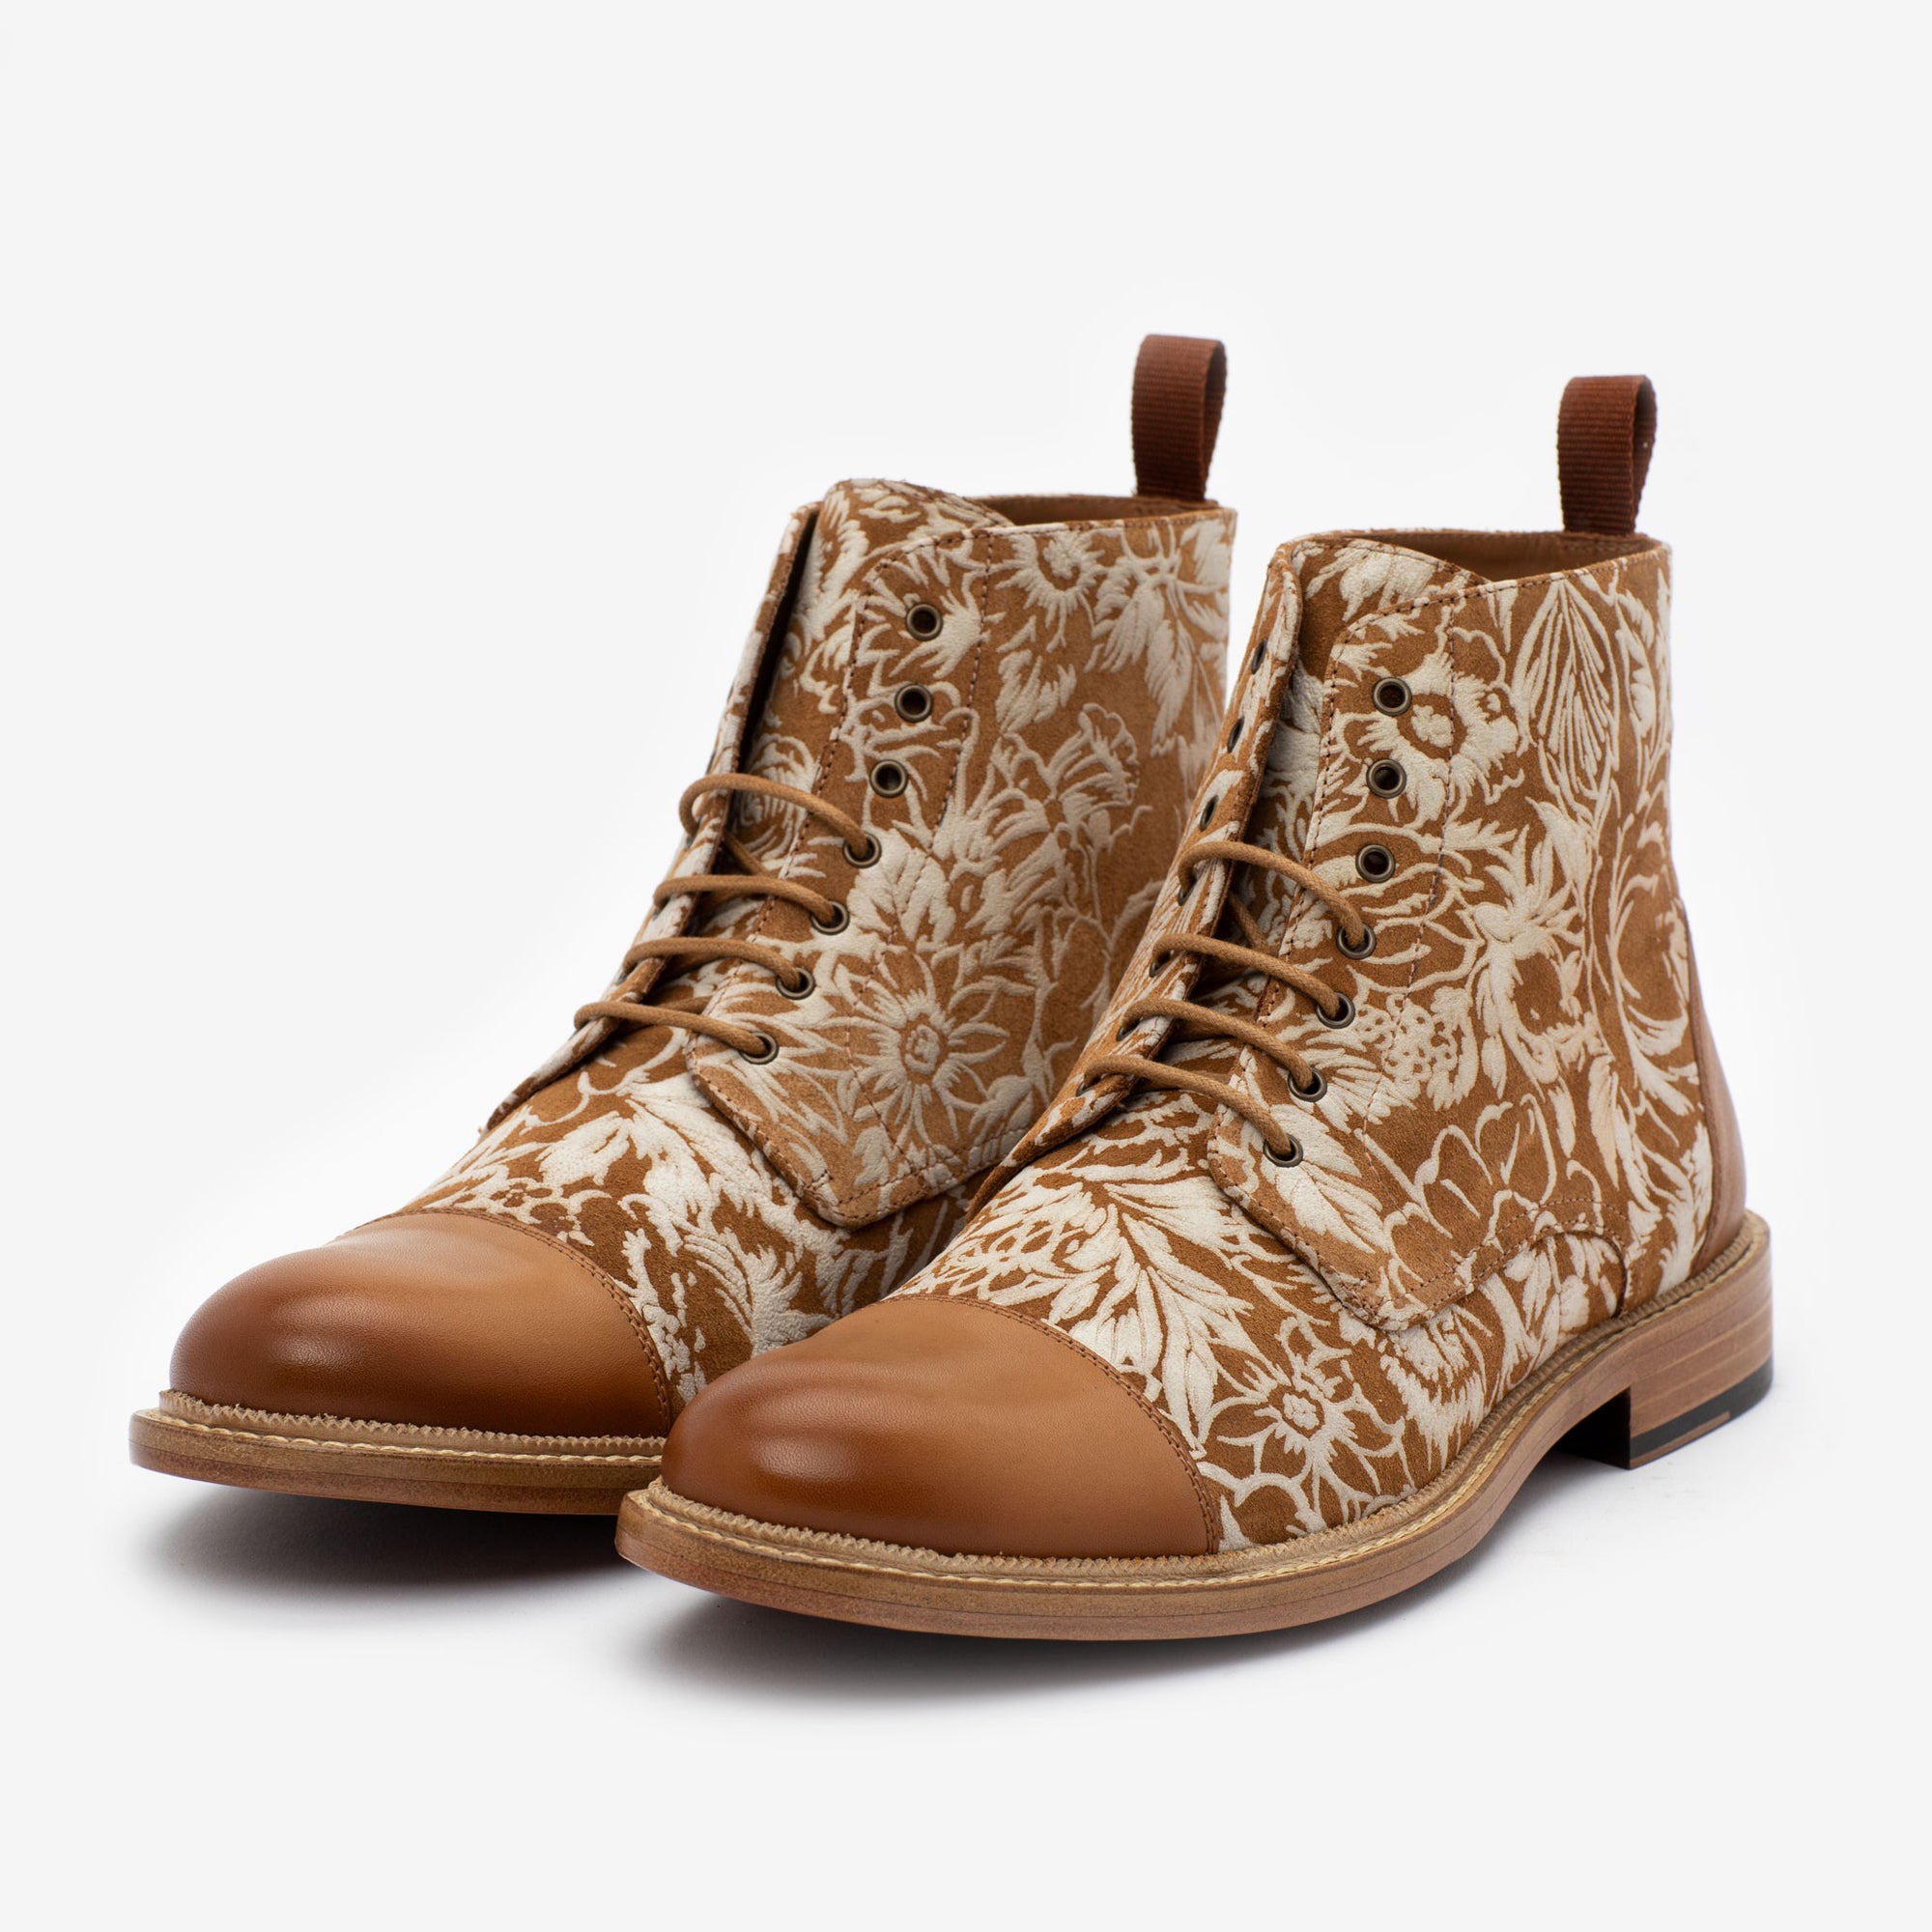 The Rome Boot in Floral {{rollover}}